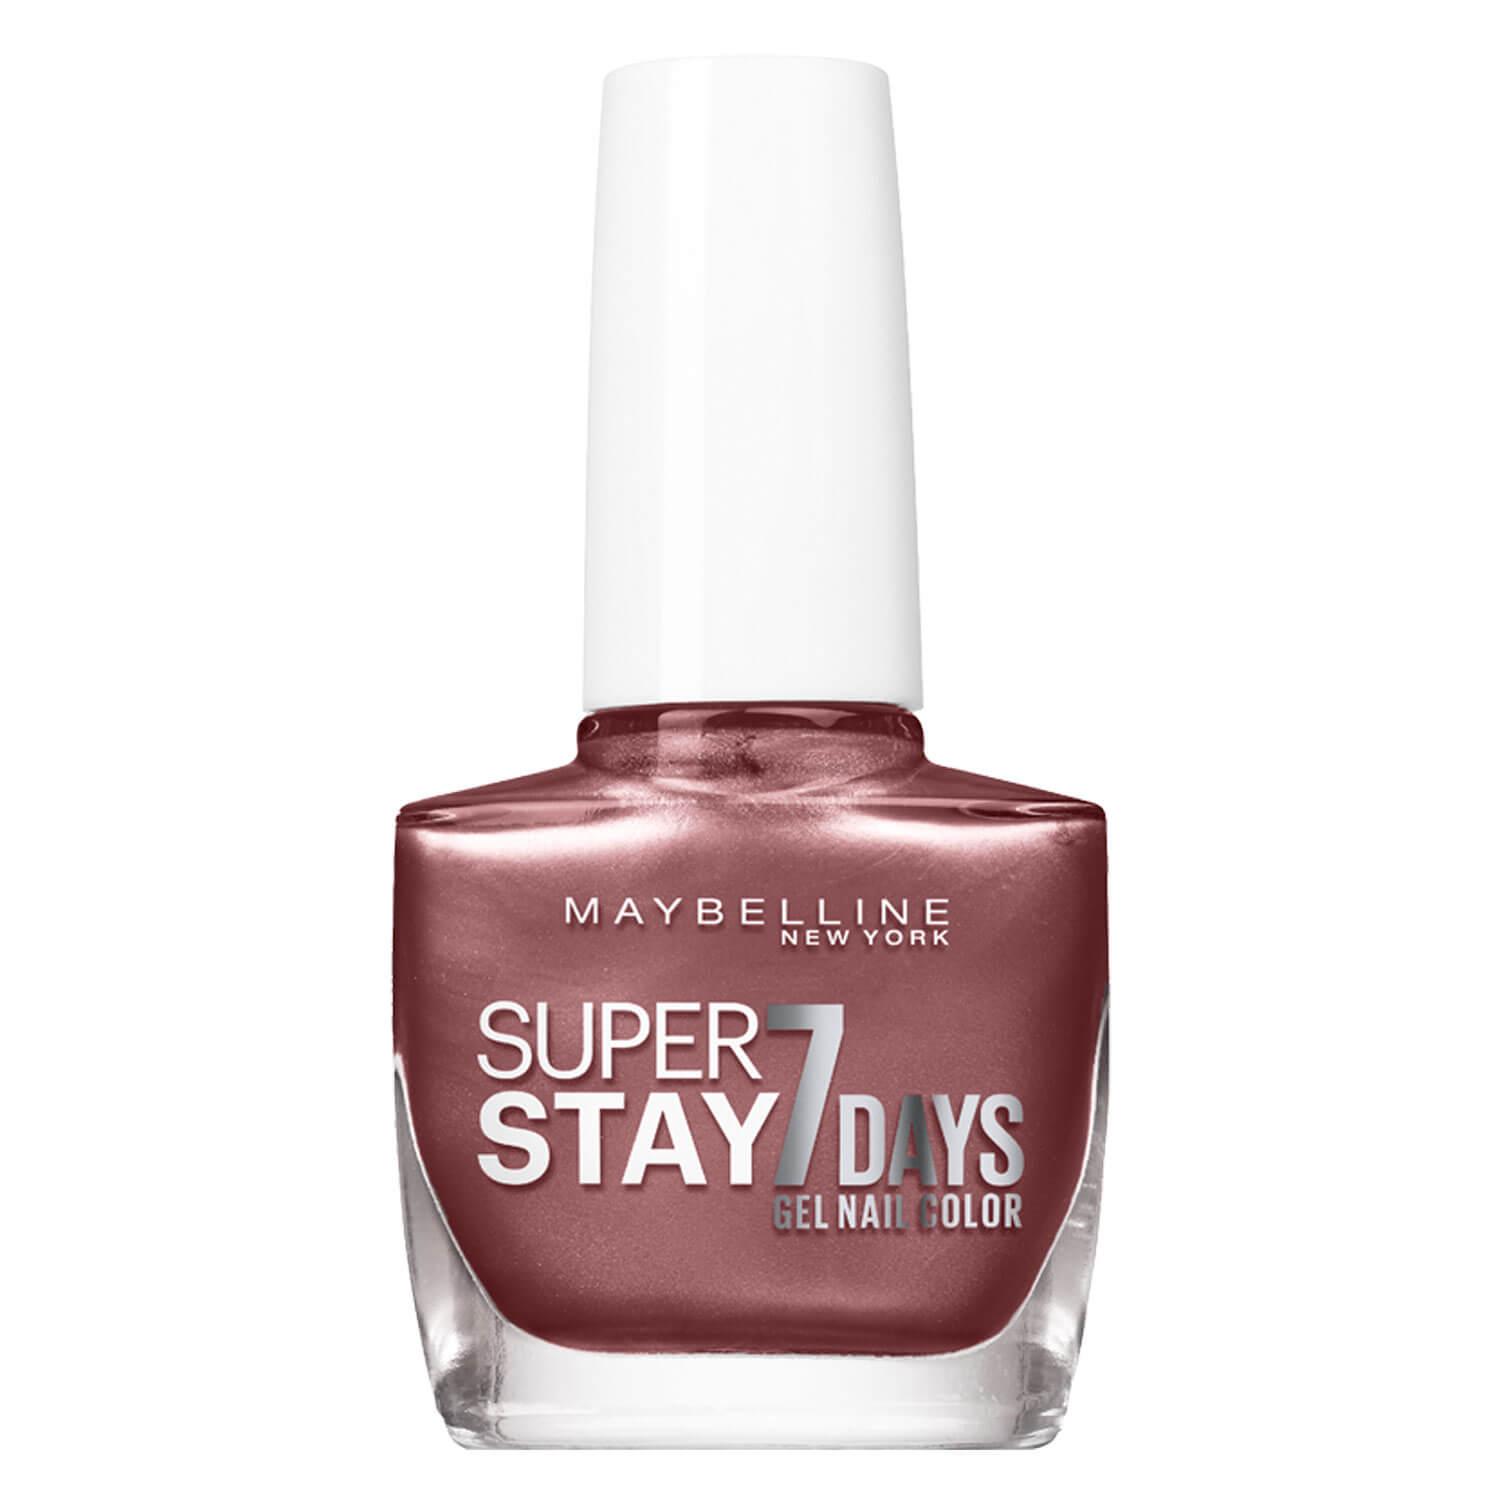 Maybelline NY Nails - Super Stay 7 Days Vernis à Ongles 912 Rooftop Shade